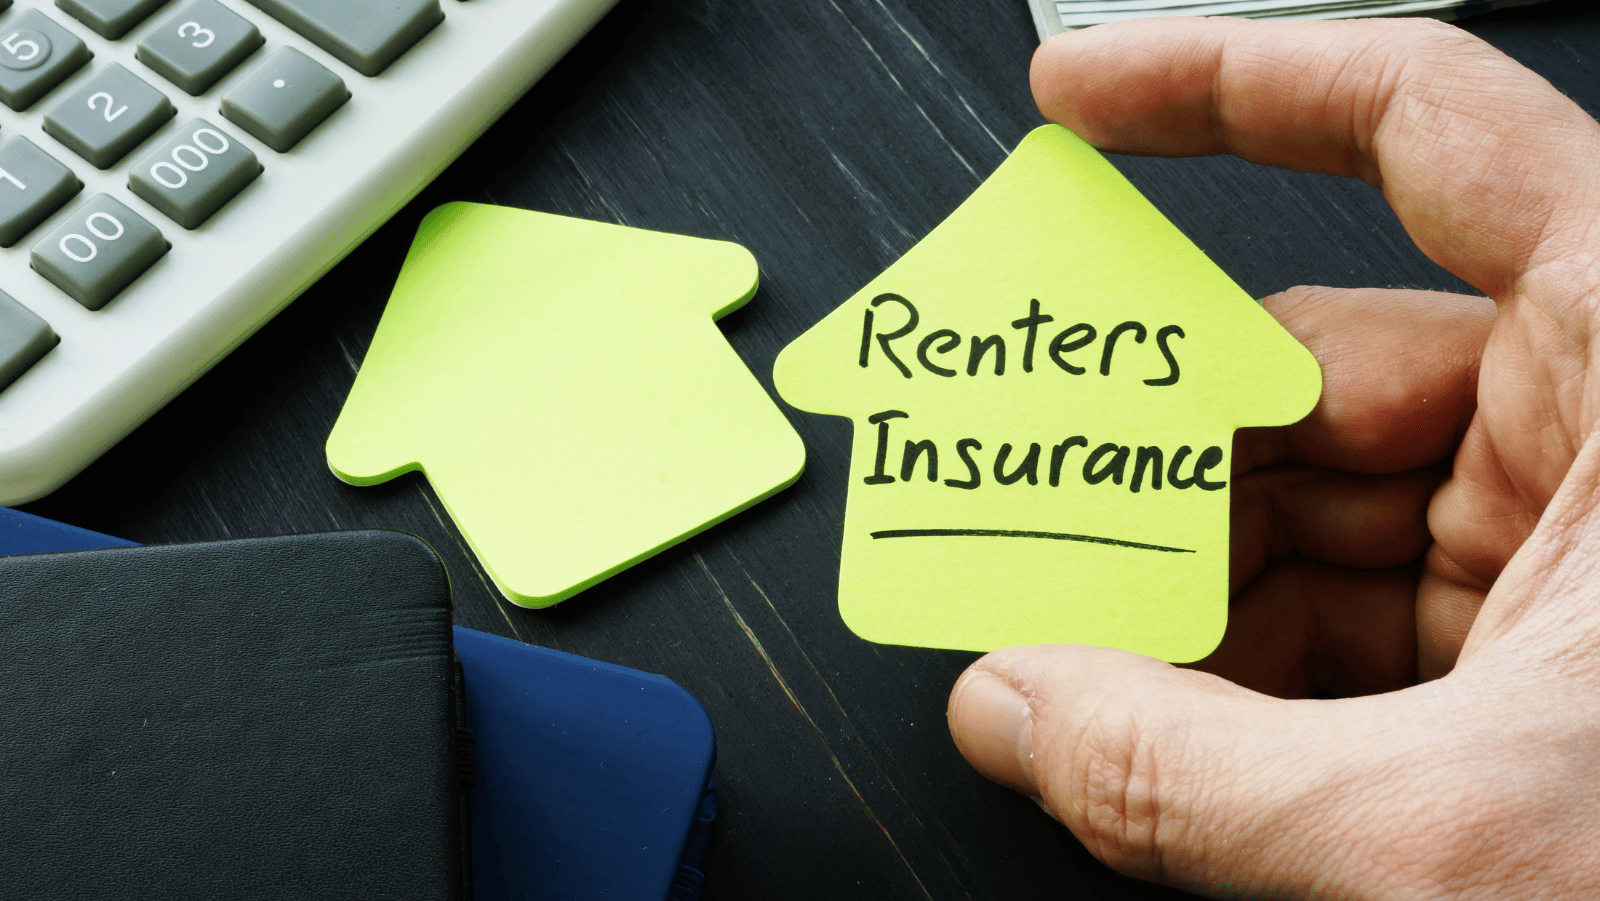 Cost of Renters Insurance; How To Find the Coverage & Limits You Need for Your Apartment or House